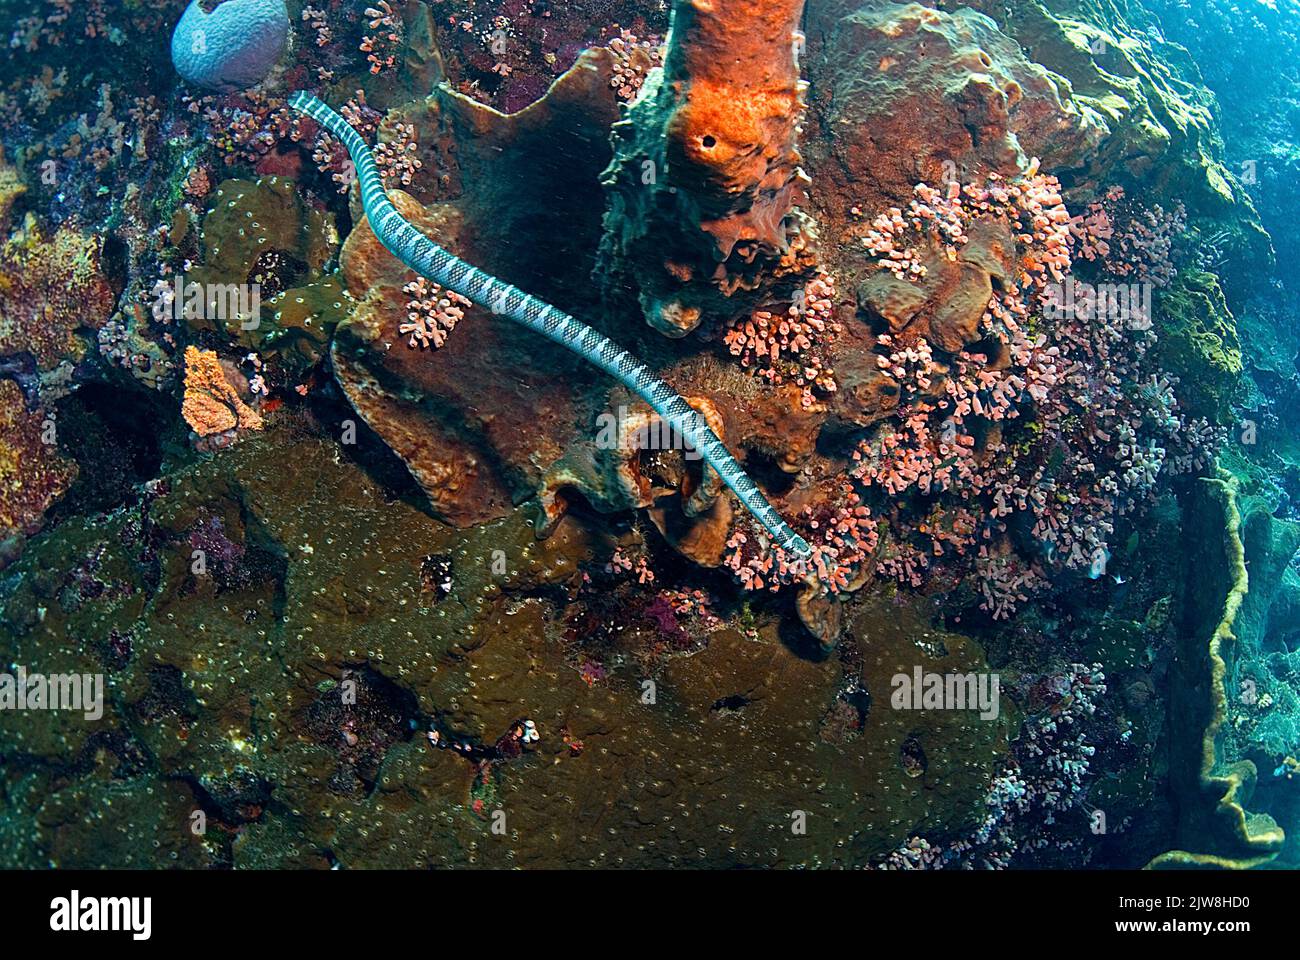 Annulated sea snake (Hydrophis cyanocinctus) also known as blue-banded sea snake, a type of venomous sea snake, Raja Ampat, Indonesia, Pacific Ocean Stock Photo